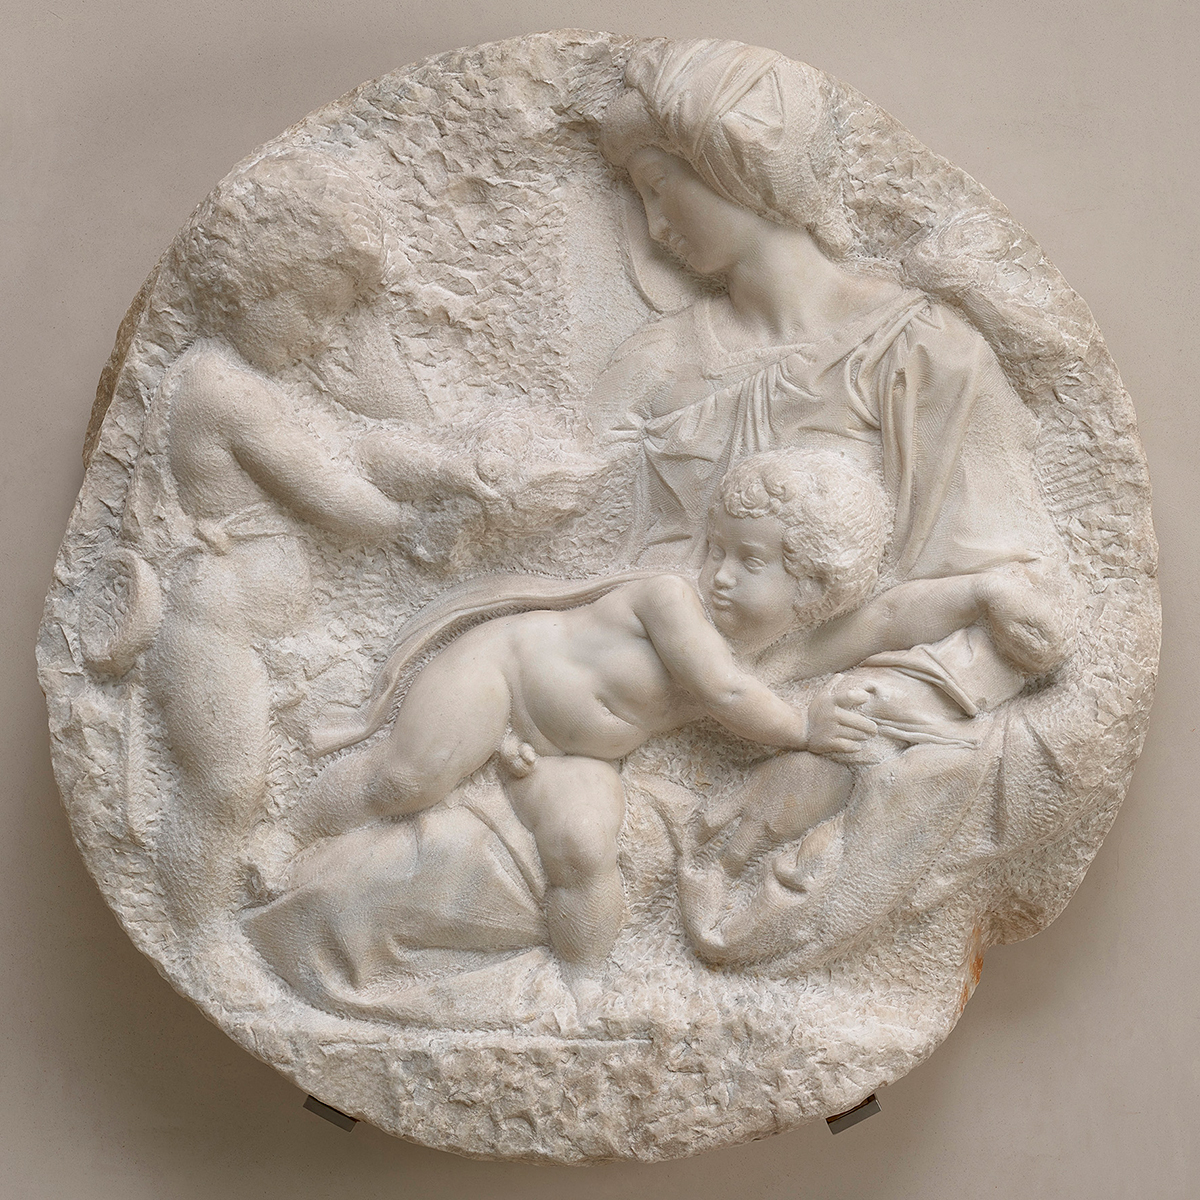 The Virgin and Child with the Infant Saint John the Baptist ('The Taddei Tondo') Michelangelo about 1504-1505 © Royal Academy of Arts, London; Photograph by Prudence Cuming Associates Limited